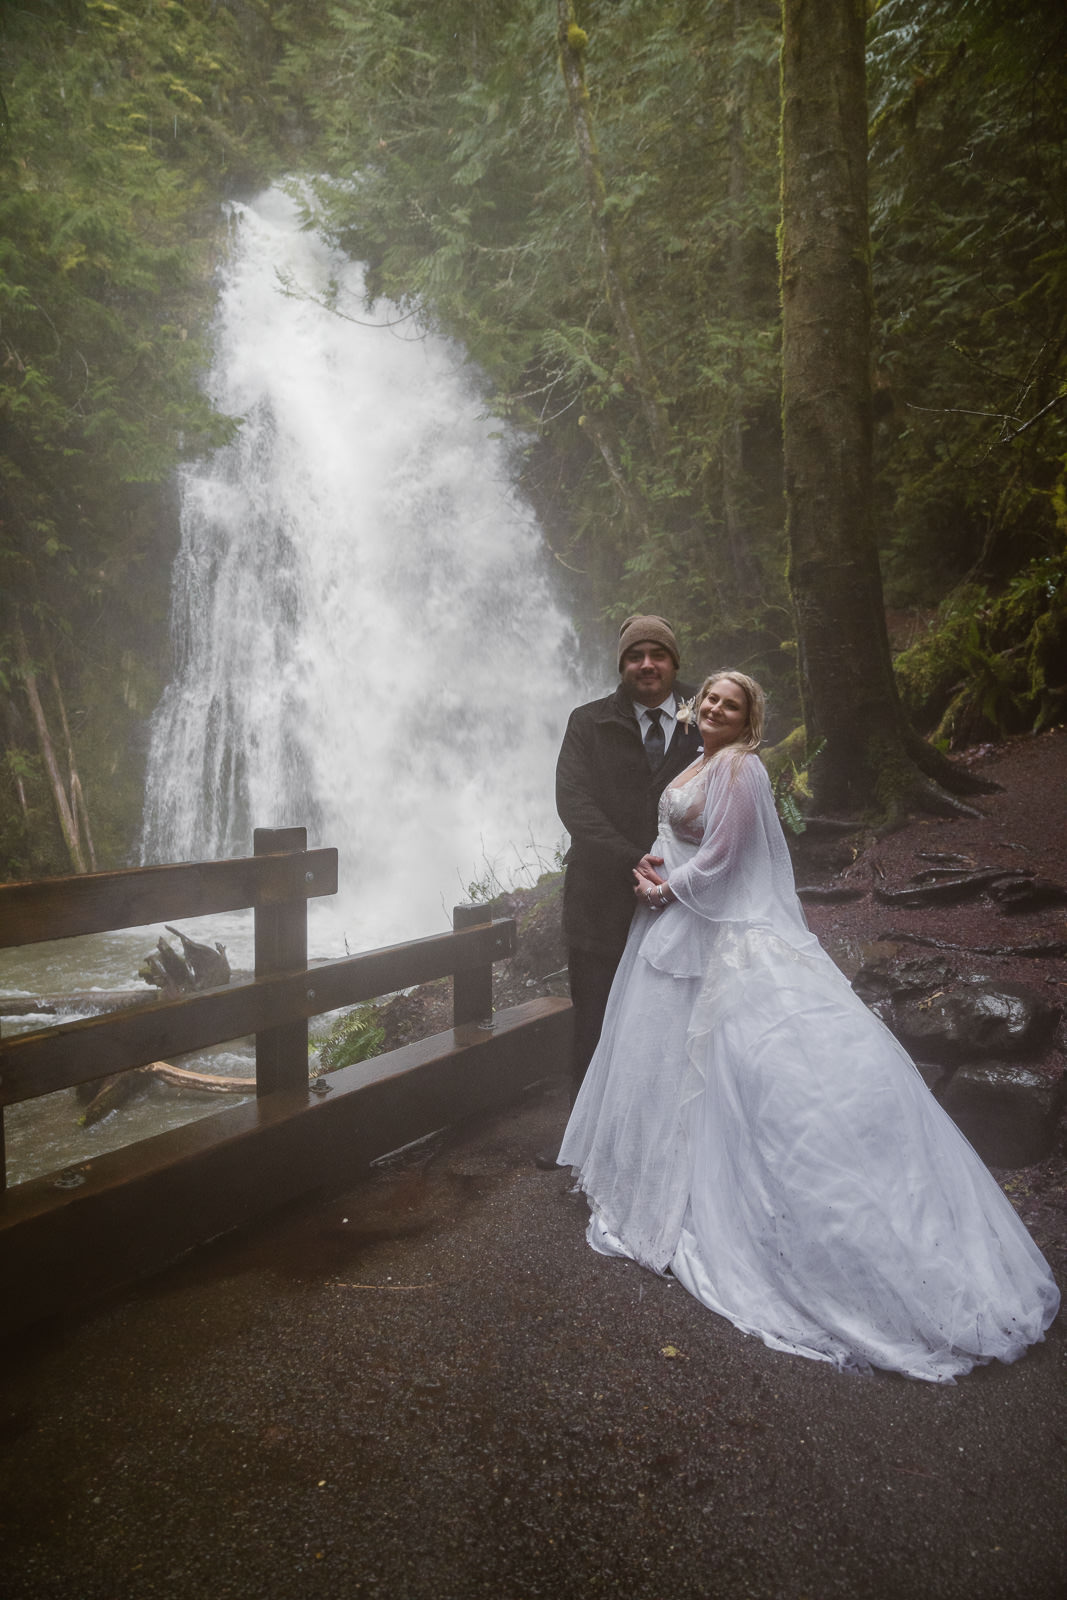 Couple elopes at Madison Falls in Olympic National Park during rain storm